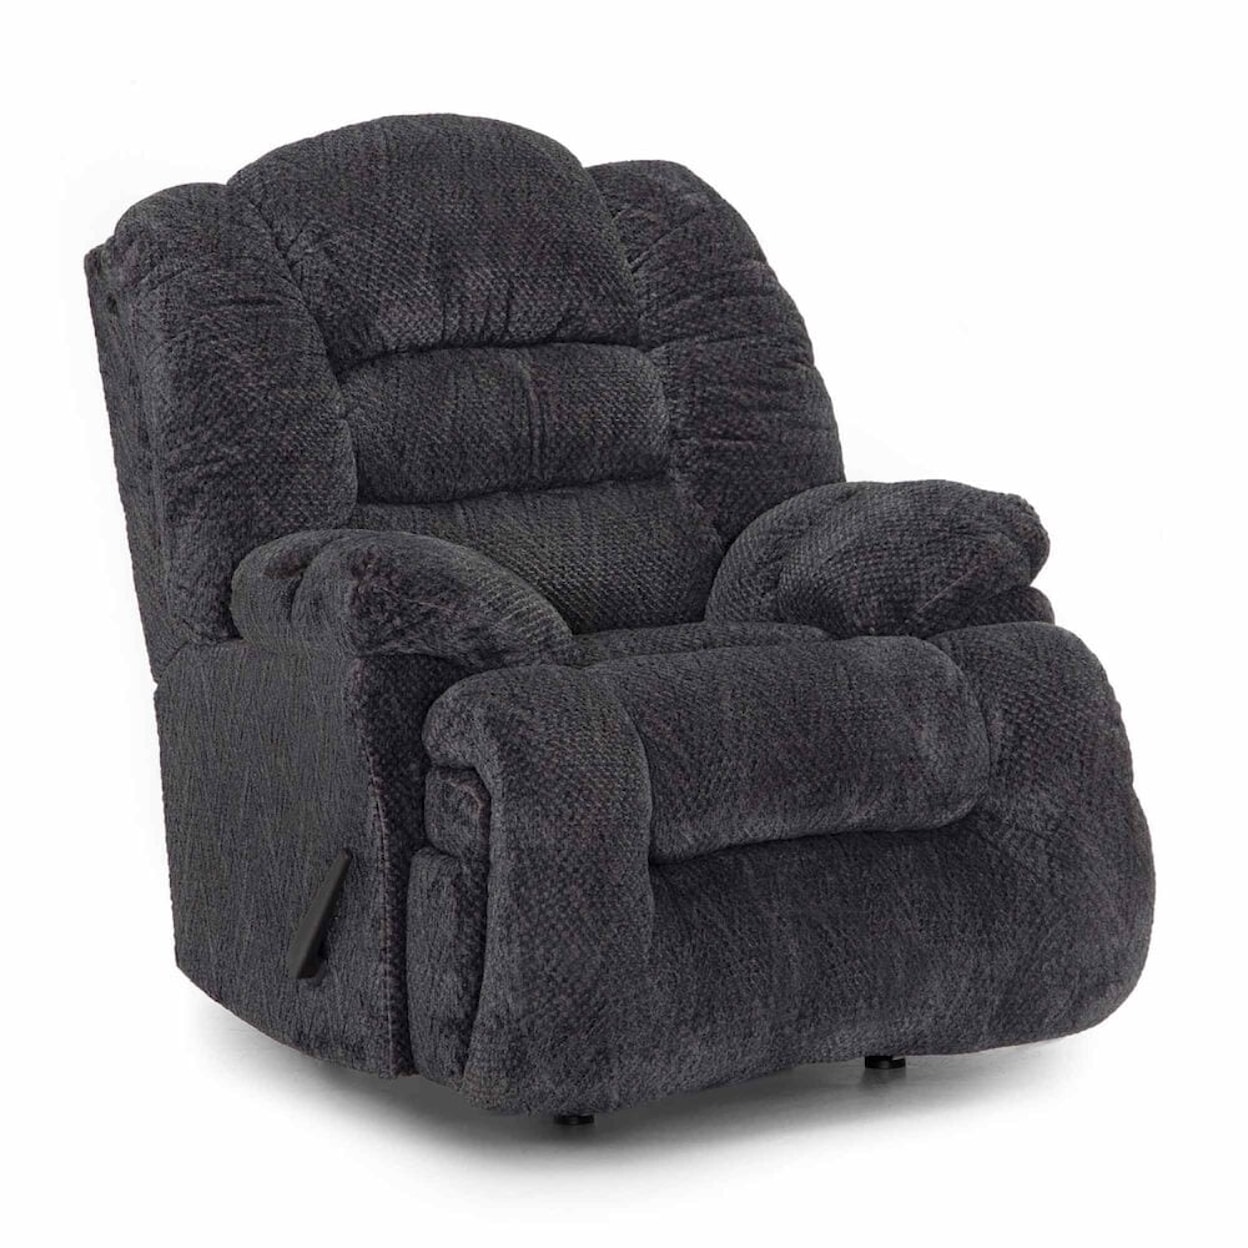 Franklin Recliners SPENNY CHARCOAL RECLINER |